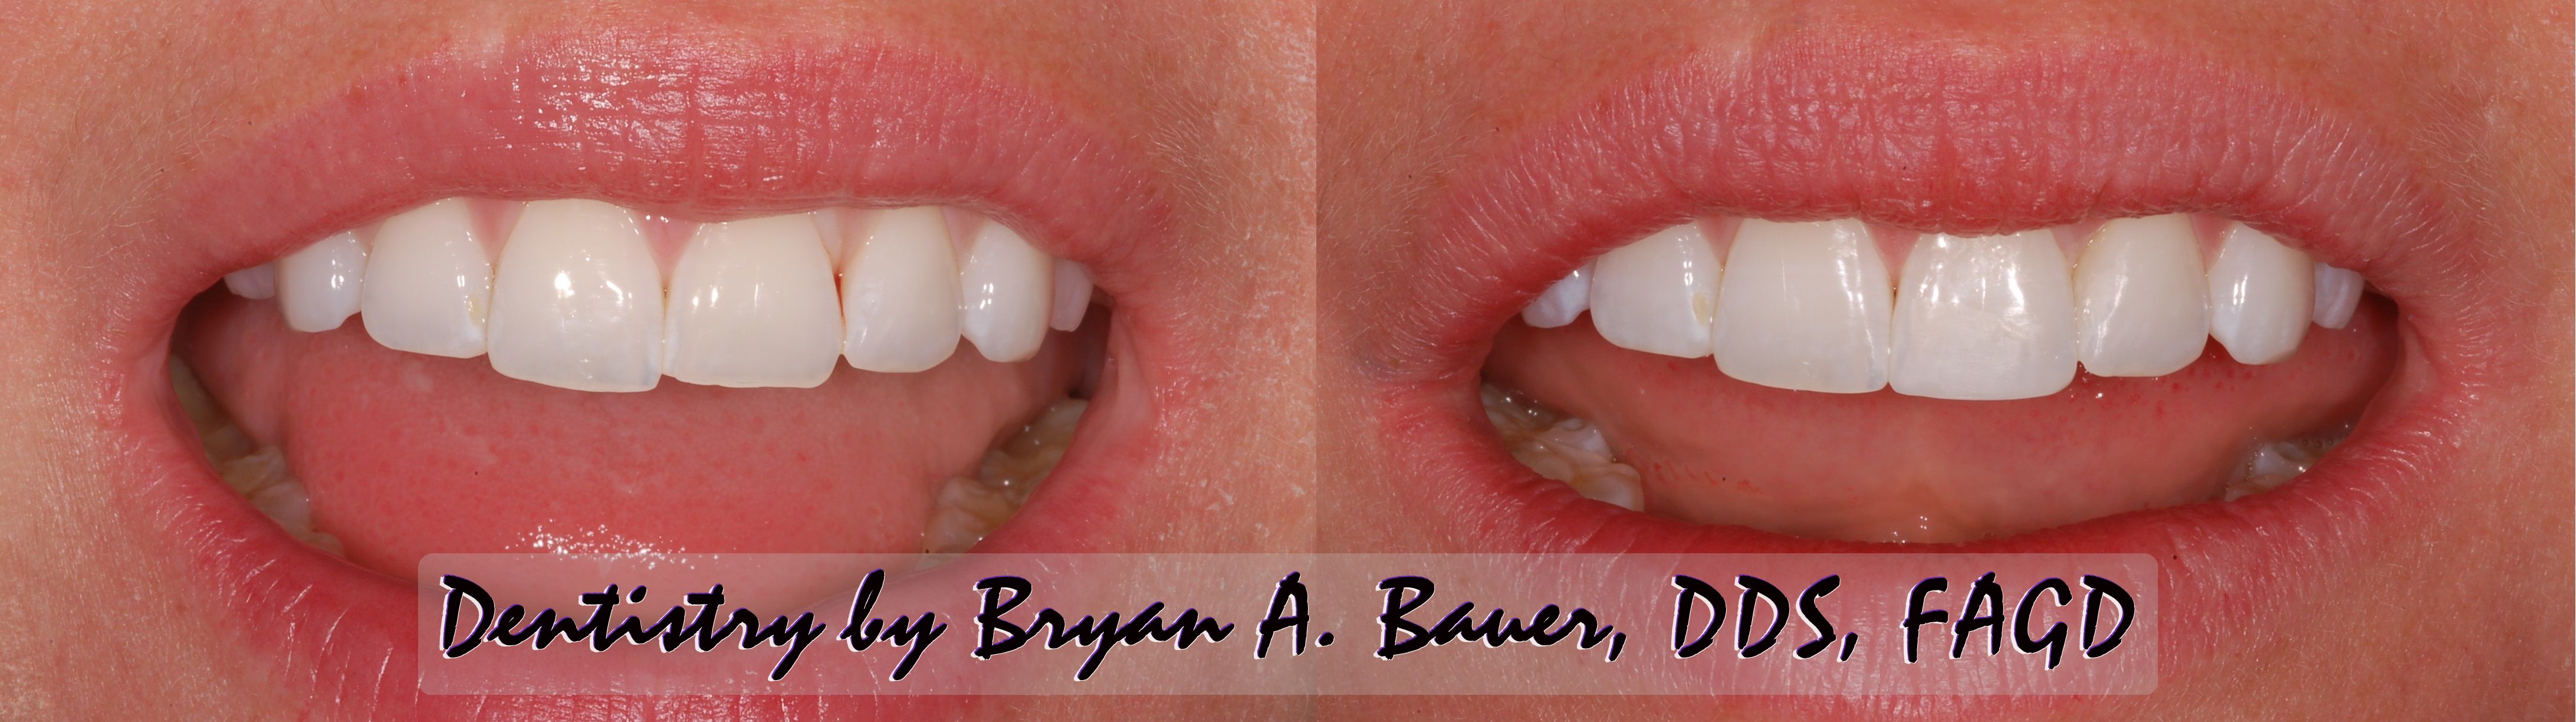 Chipped front tooth filling - Easy Solution! - Bauer Smiles